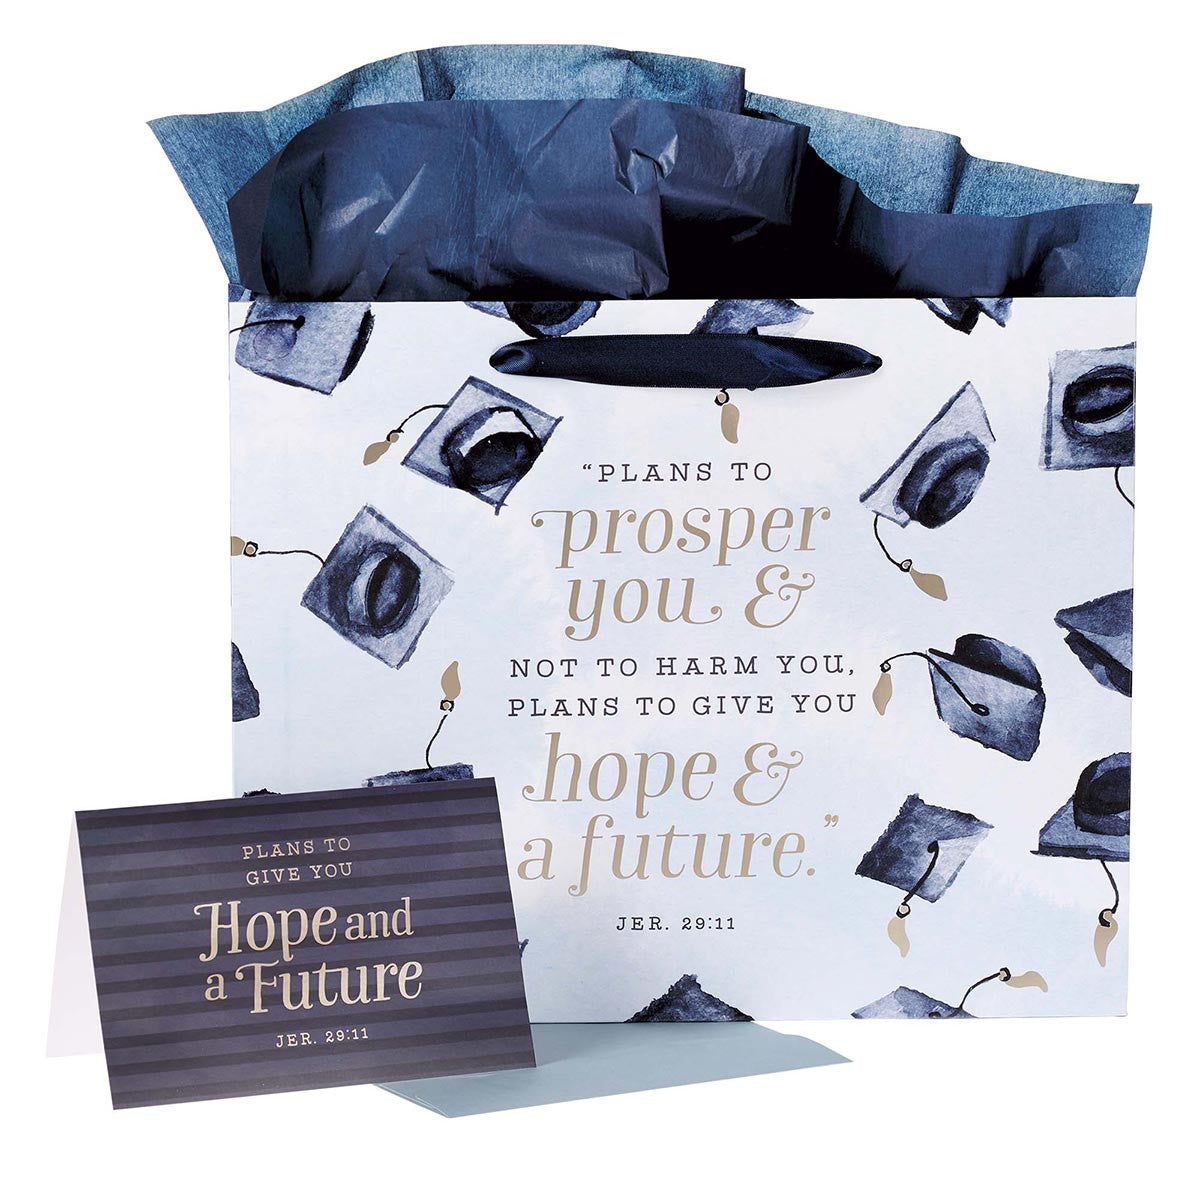 Hope & a Future Large Blue Gift Bag Set for Graduates with Card and Envelope - Jeremiah 29:11 - The Christian Gift Company